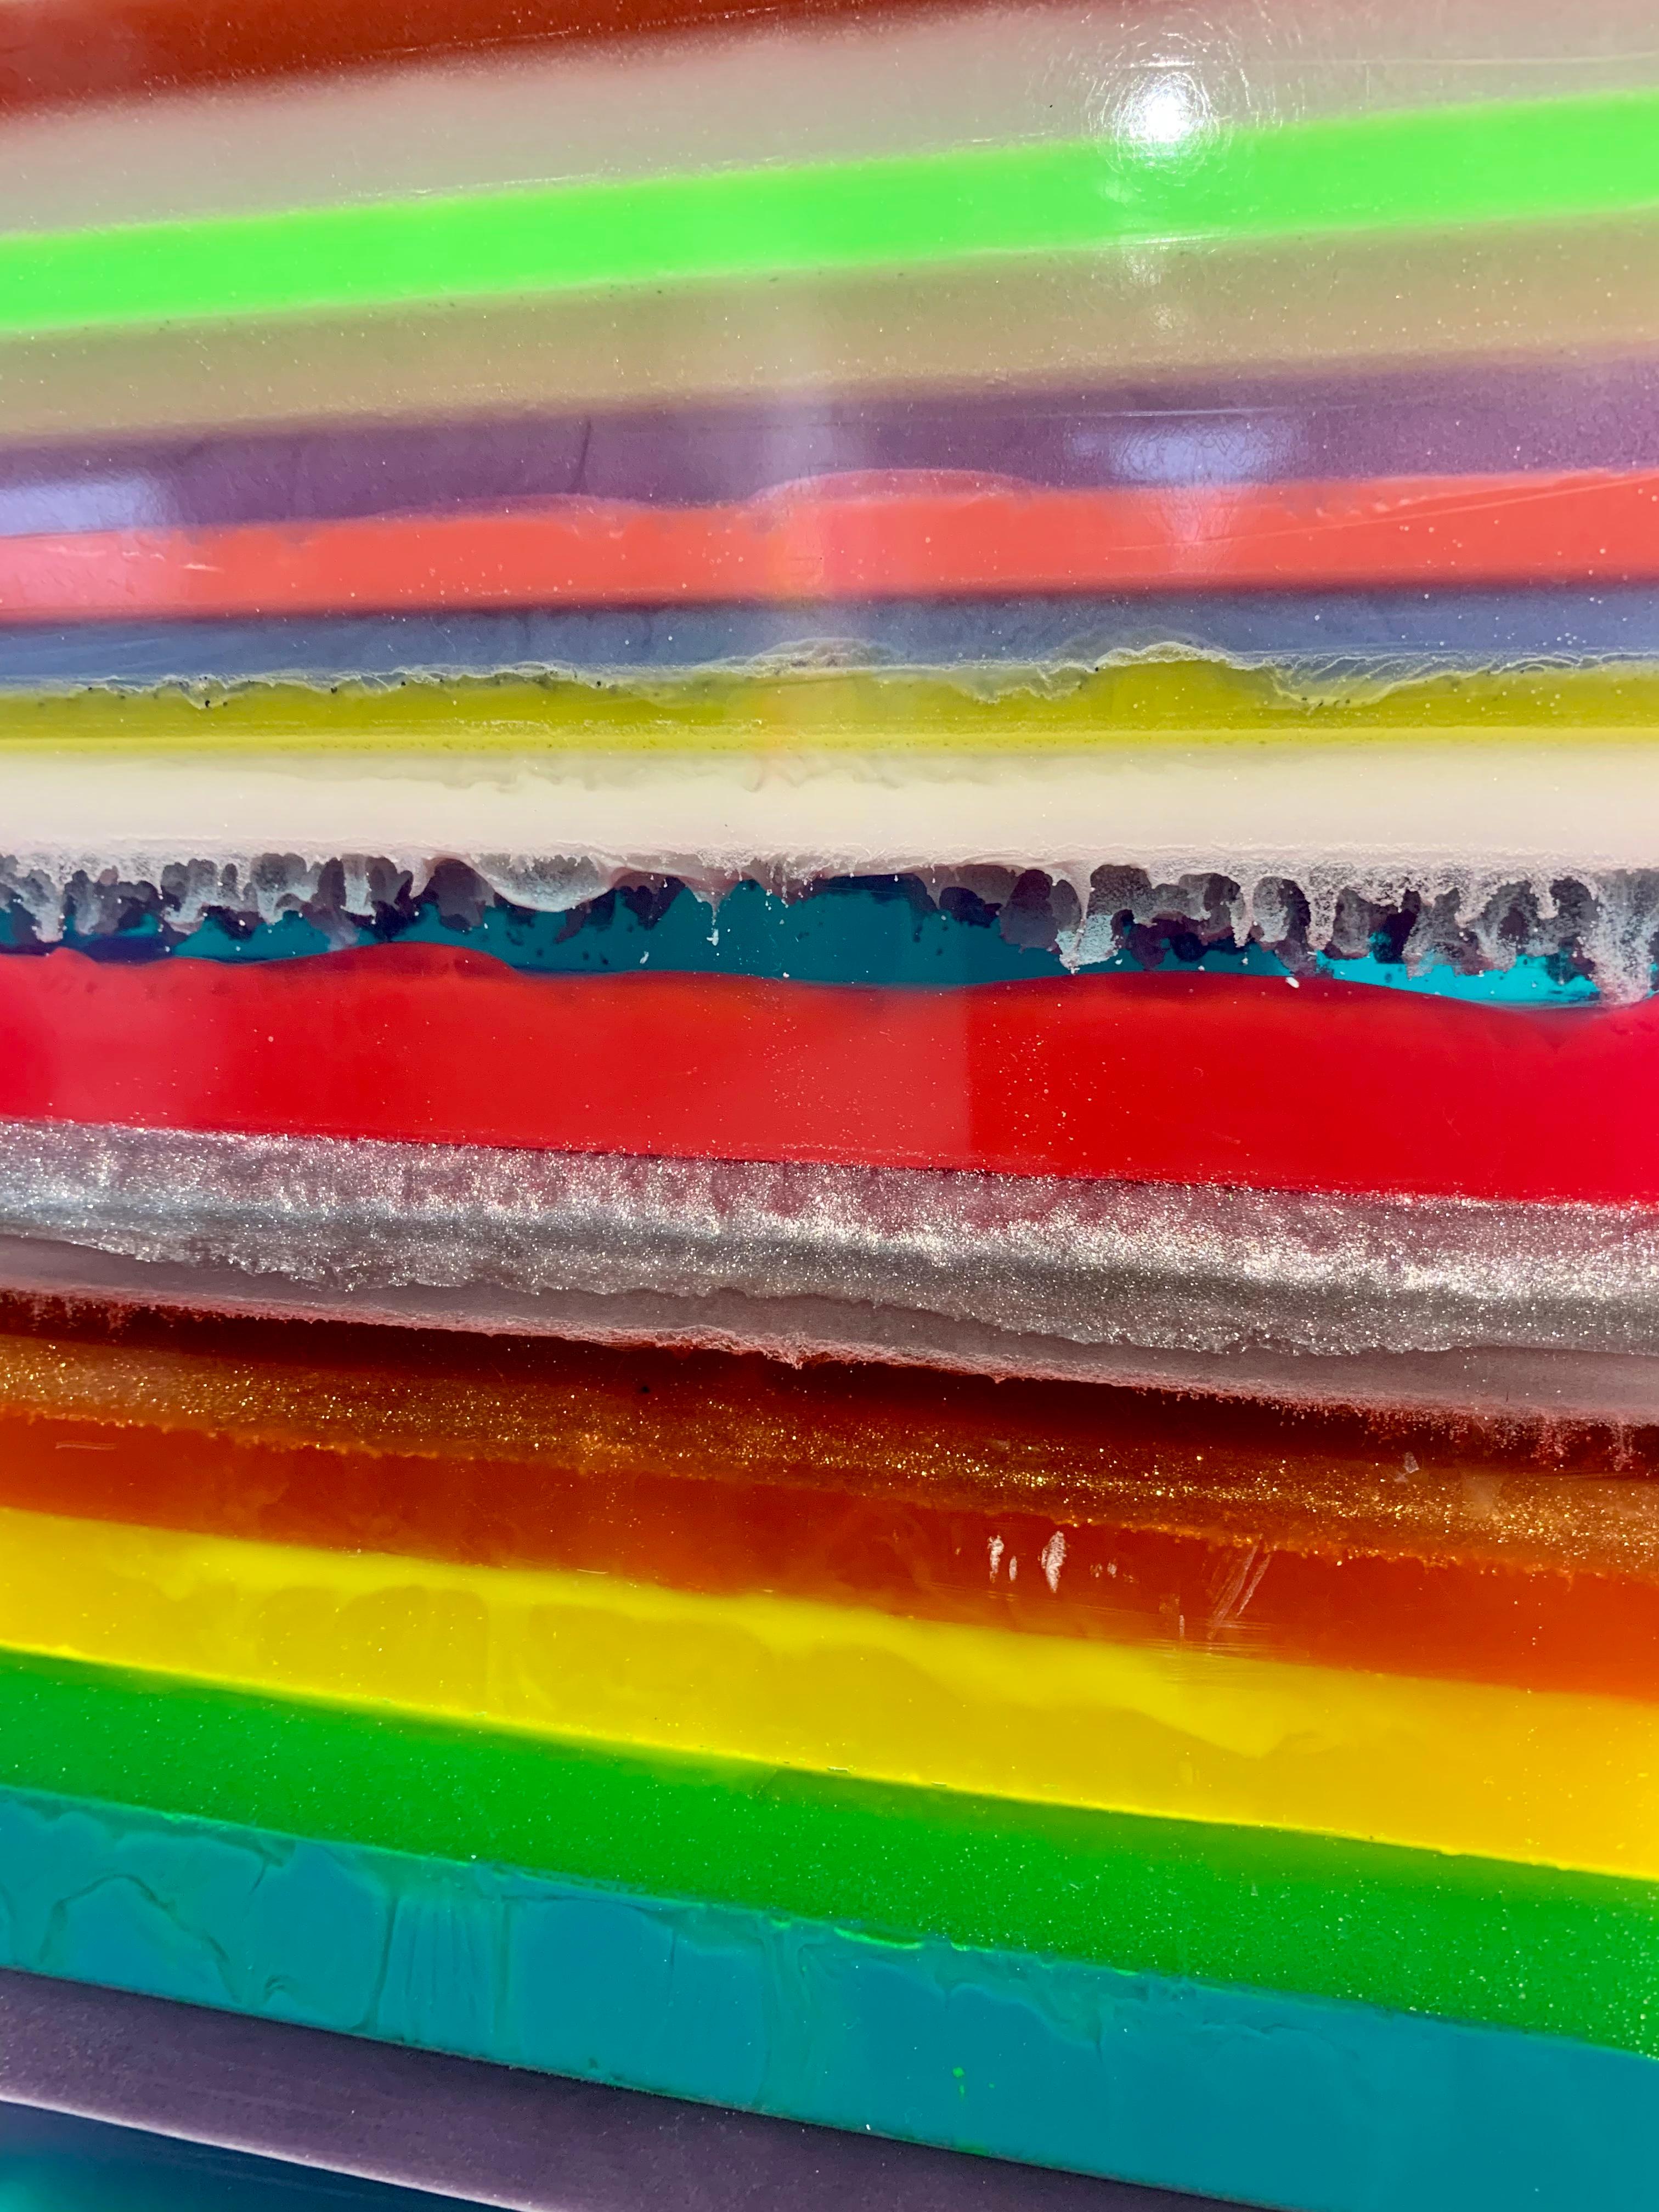 Lines, Crossing Sections, Color Overlays. Life is full of intersections, corners and shades of vibrancy and so are the artworks by Katharina Hormel.
This beautiful epoxy resin sculpture is full of details, colors intermingling and speaks a clear